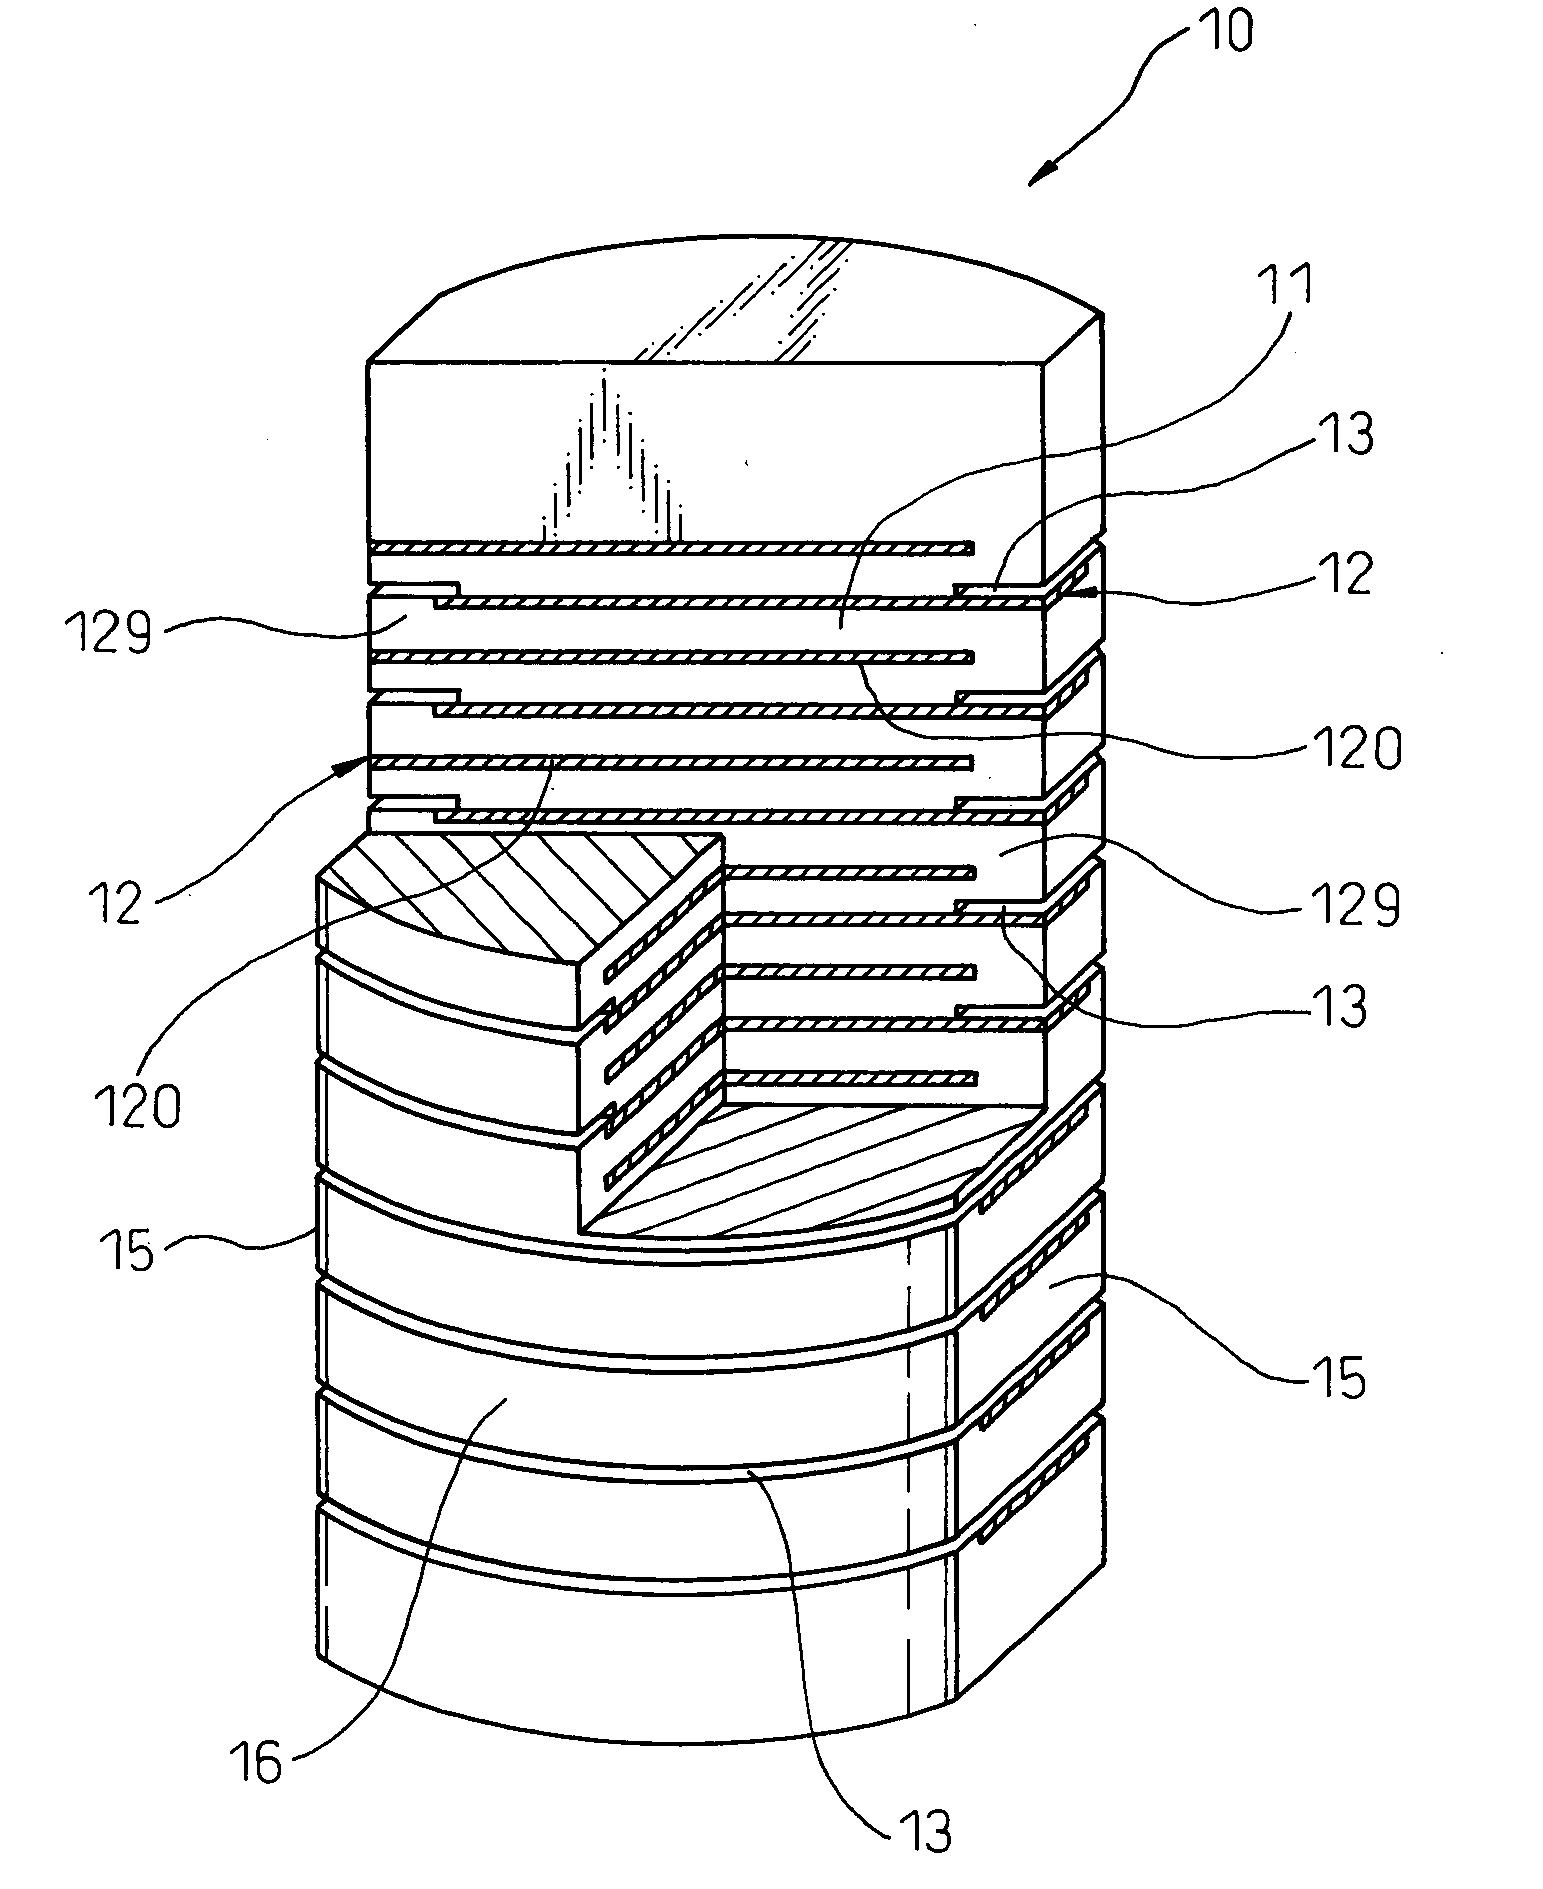 Laminated-type piezoelectric element and a manufacturing method thereof